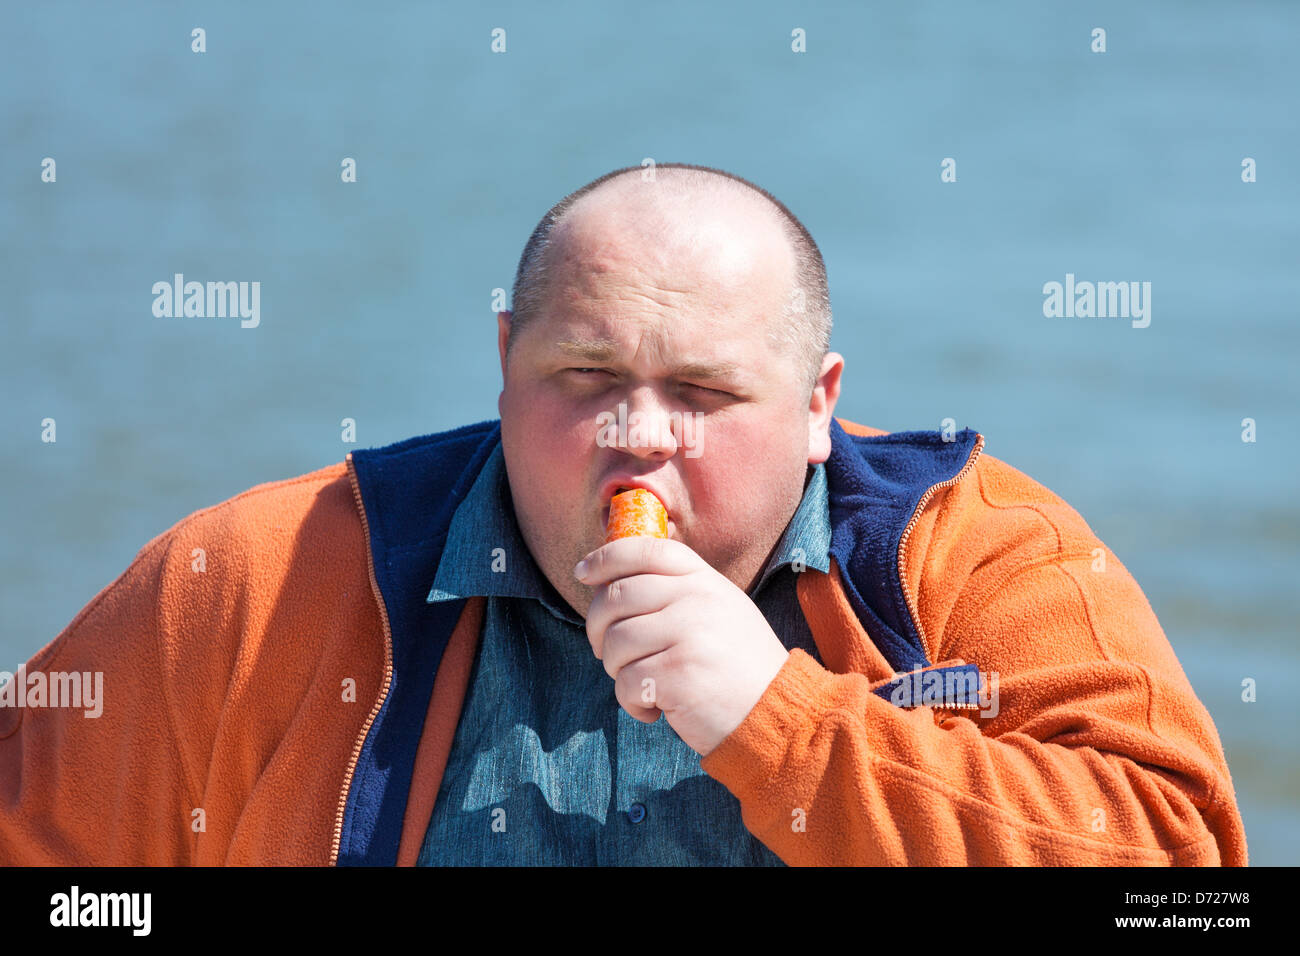 Fat man eating a carrot, on a background of water Stock Photo